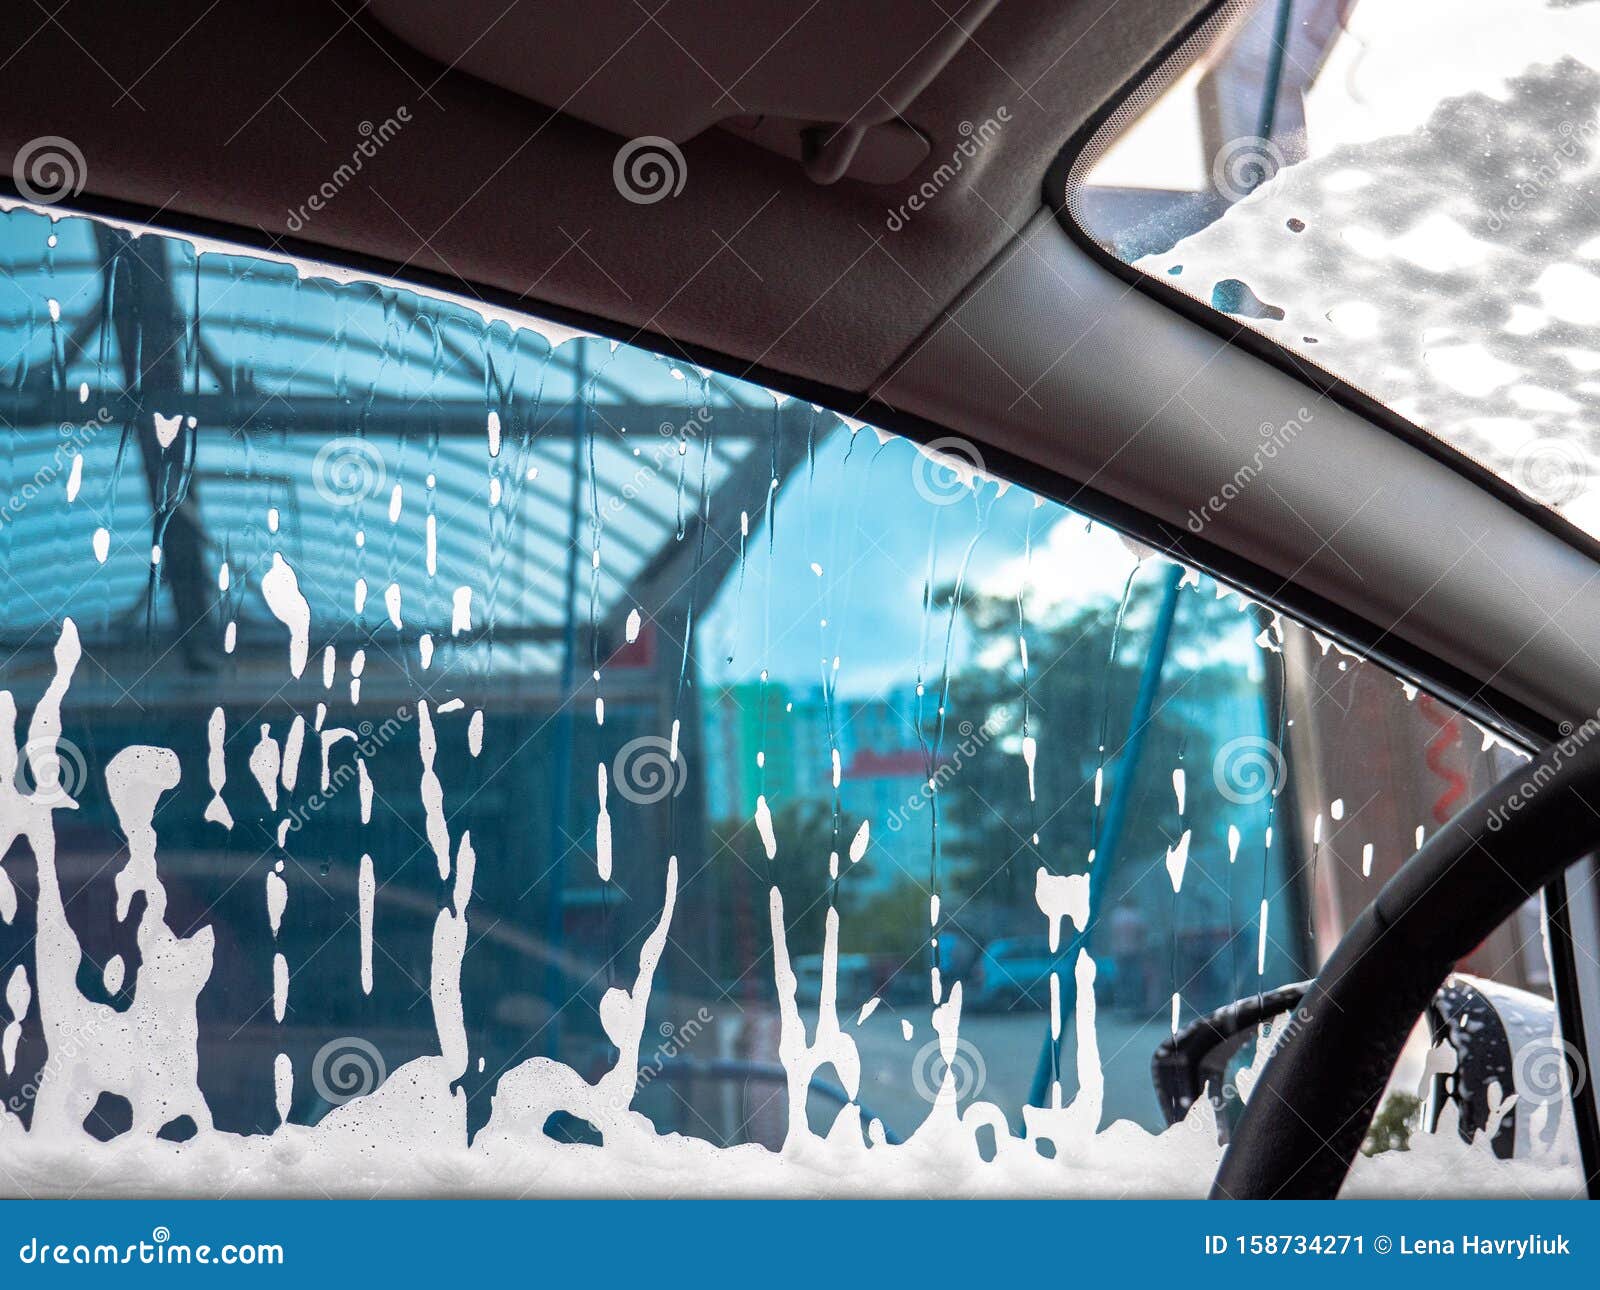 Car Soaking Under Soap Foam At A Do It Yourself Car Wash Stock Image - Image of dirt, serve ...